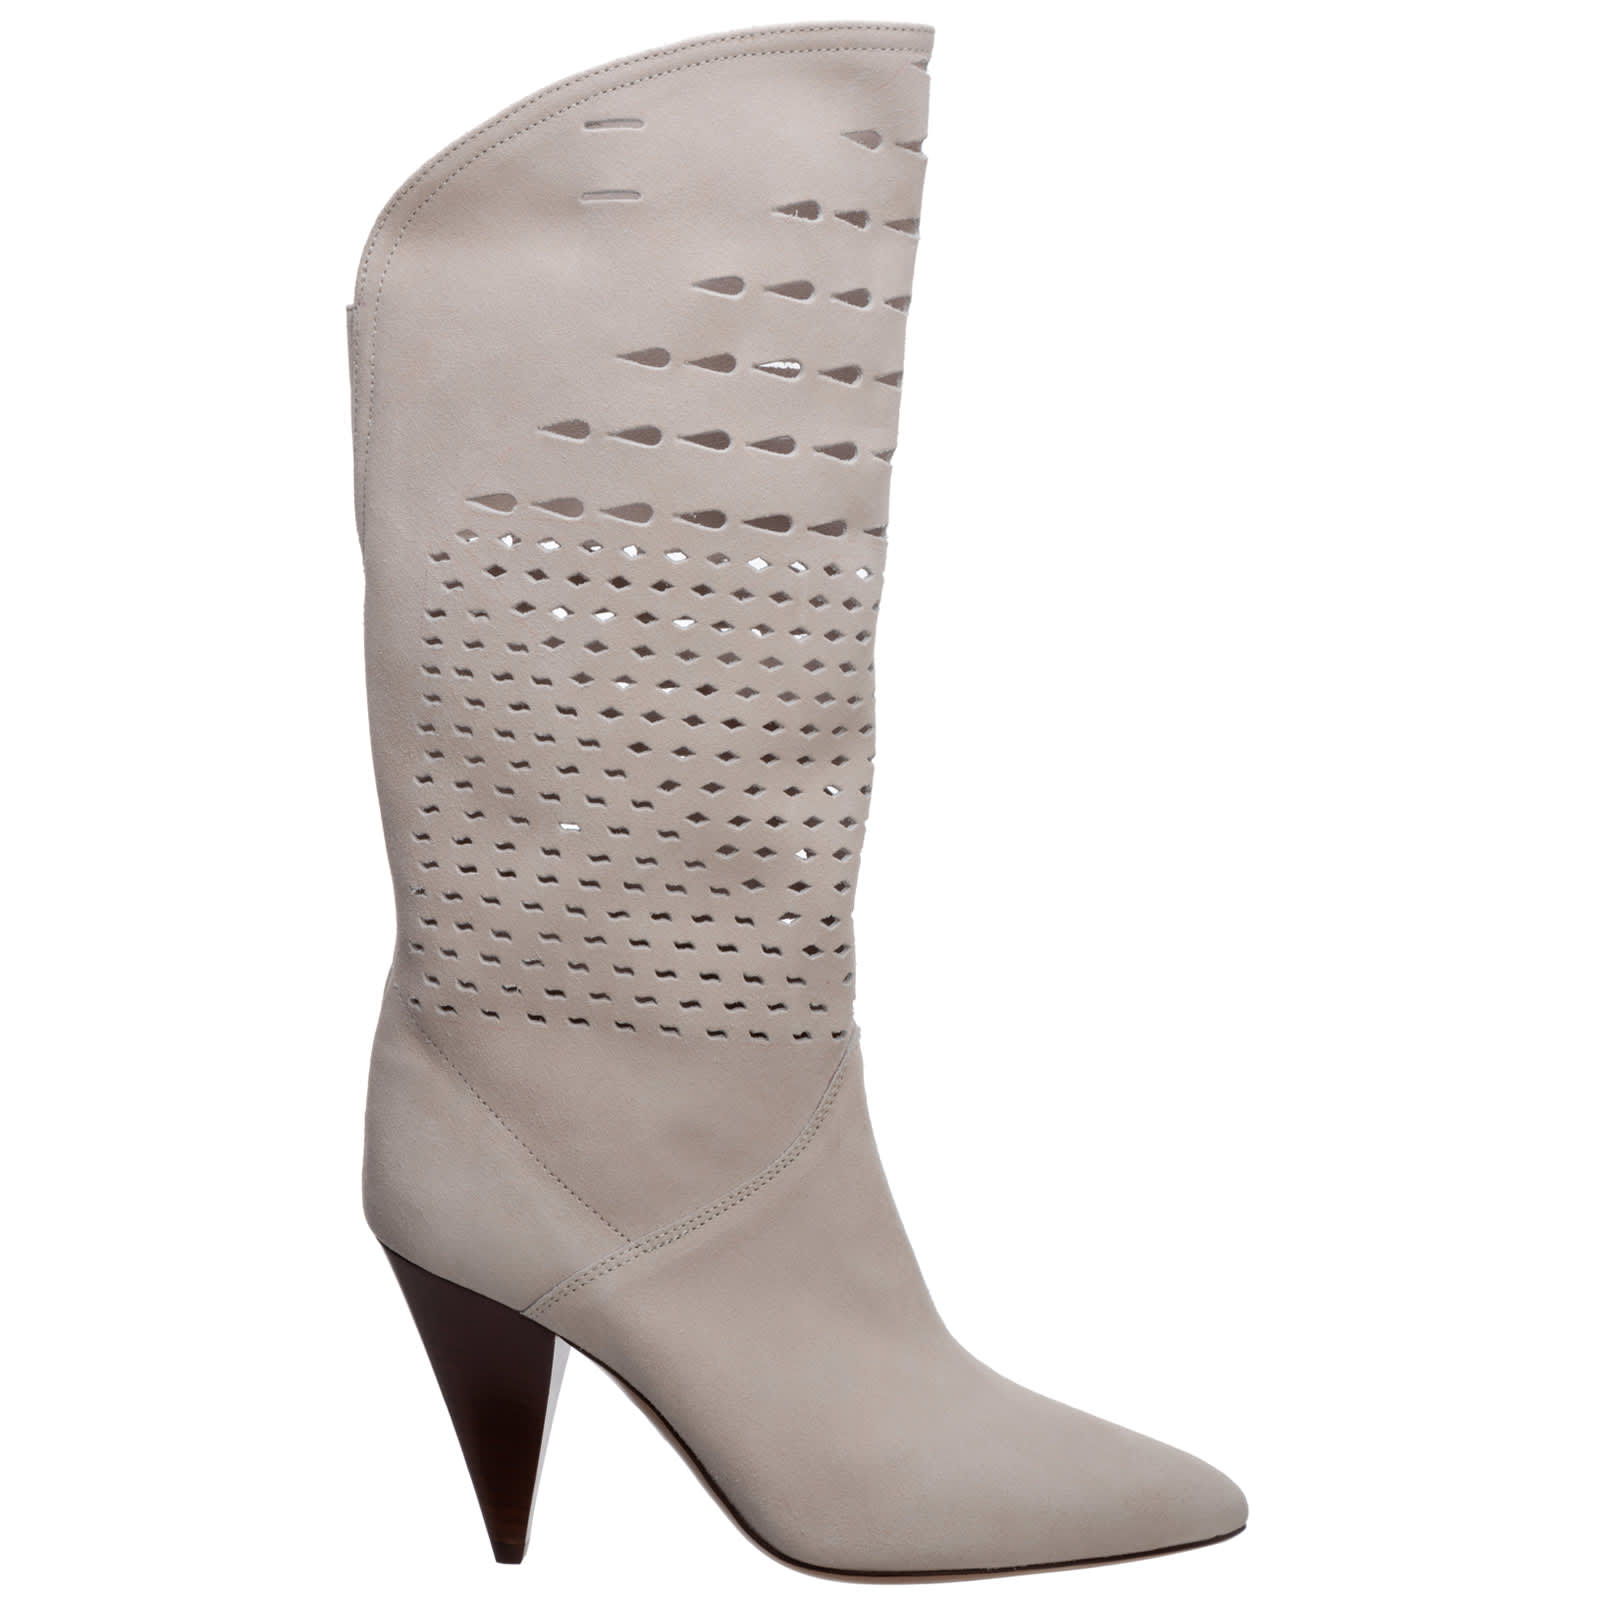 Buy Isabel Marant Spencer Boots online, shop Isabel Marant shoes with free shipping